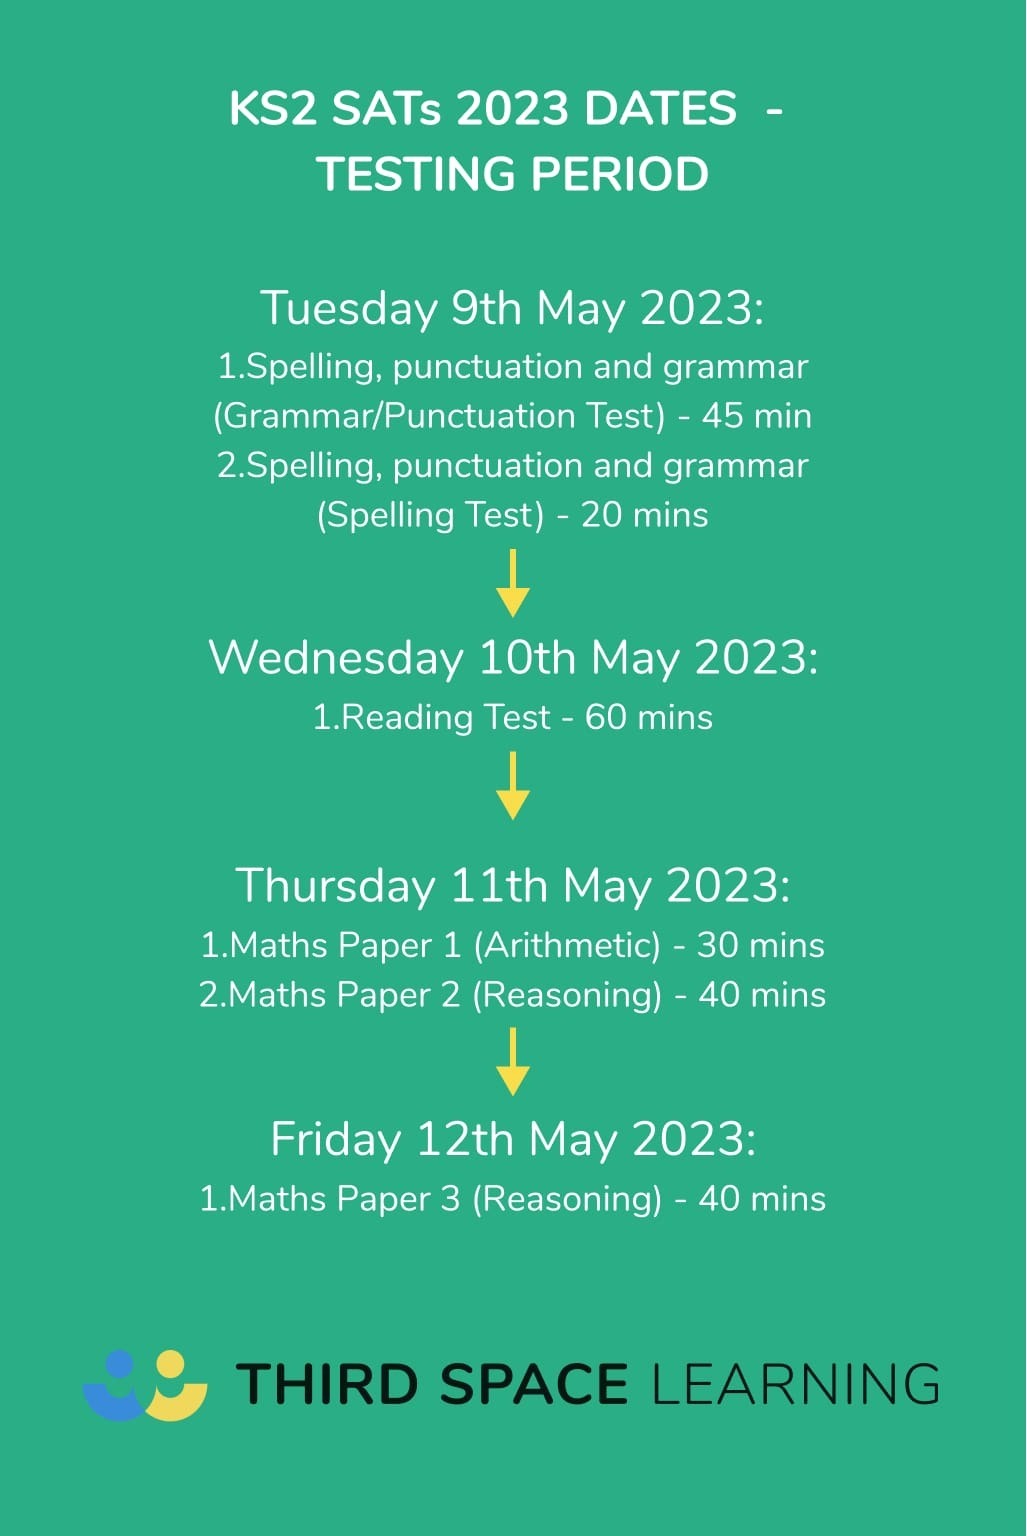 SATs 2023 dates for ks2 year 6 pupils